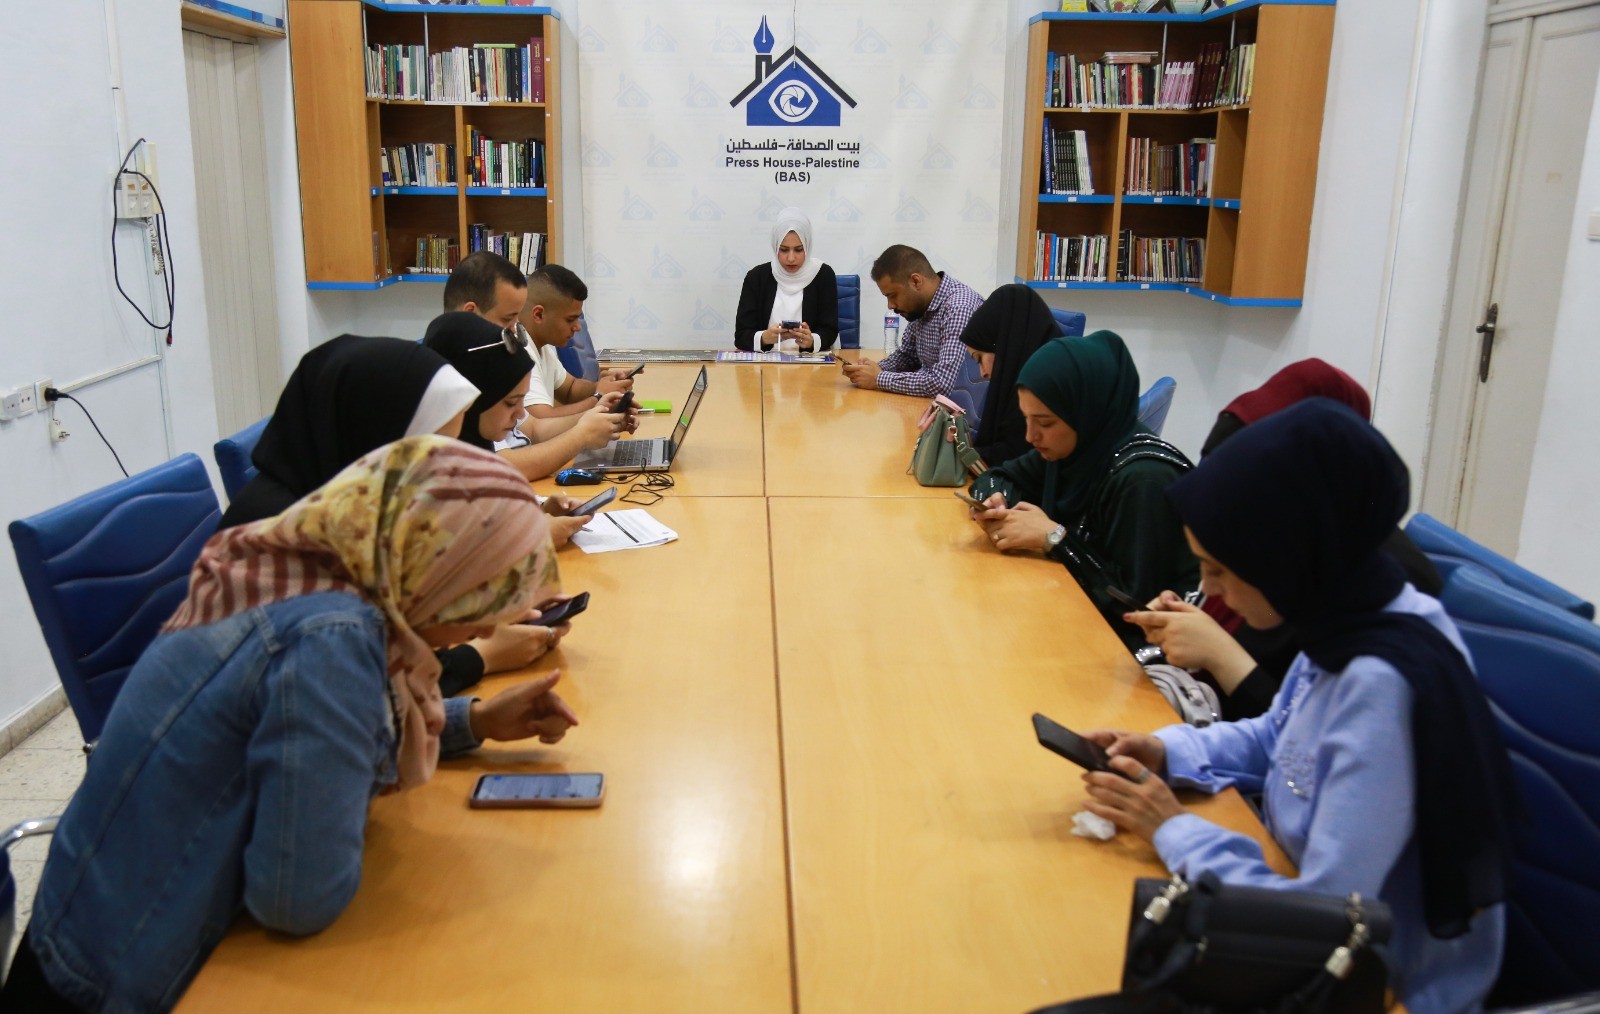 Press House holds a tweet session to demand for the protection of journalists during wars